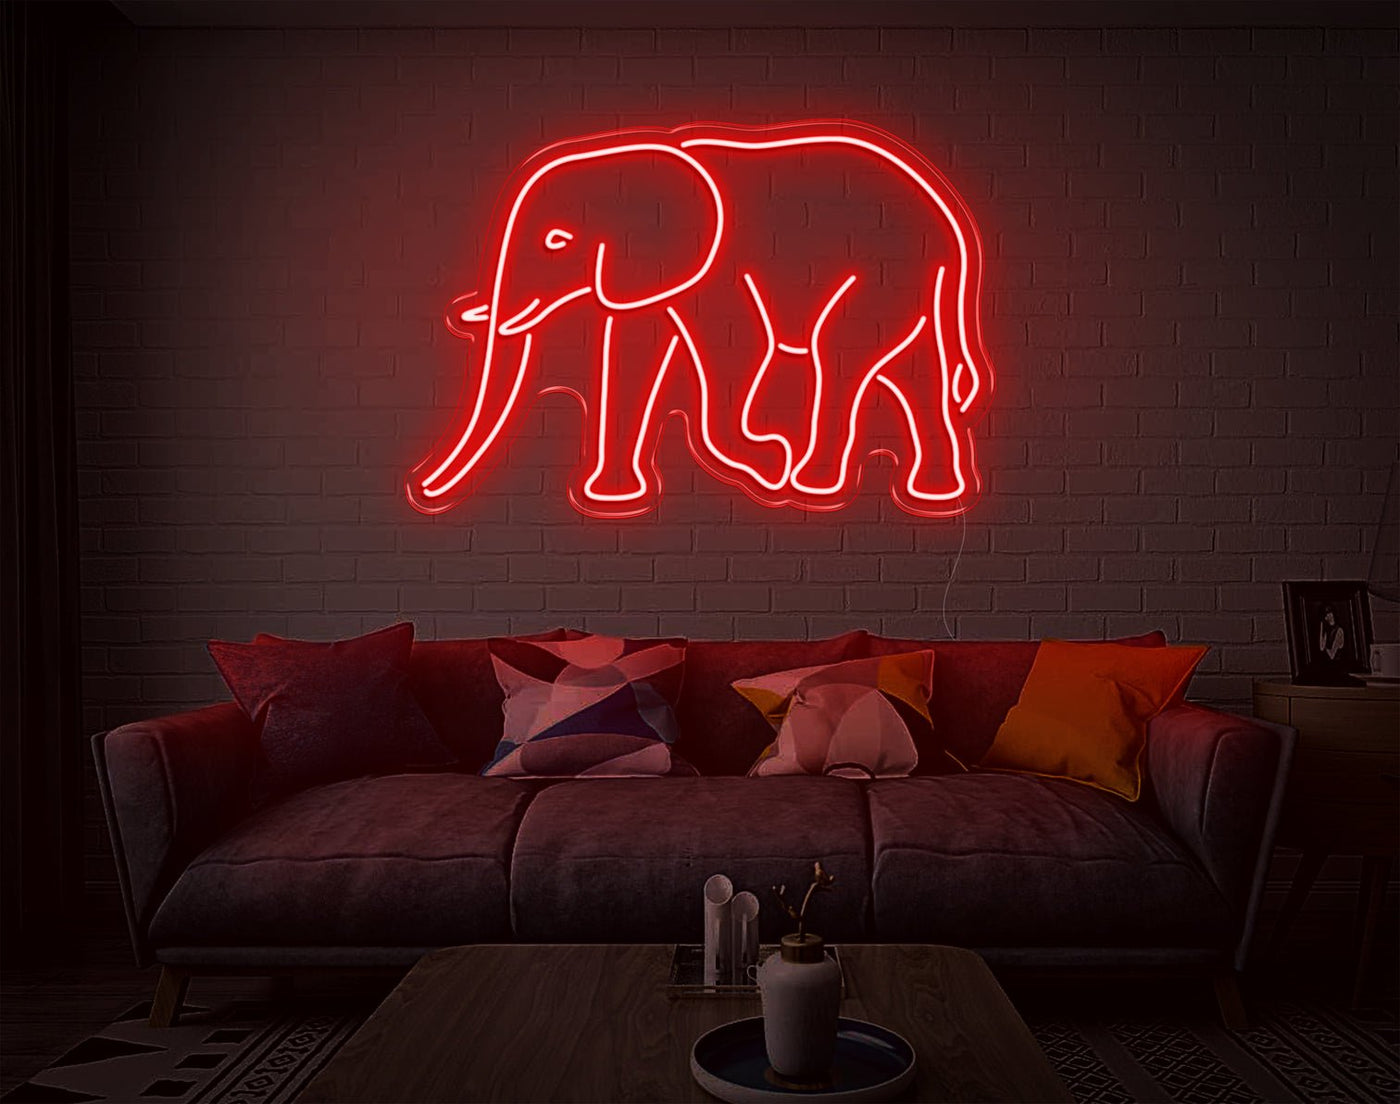 Elephant LED Neon Sign - 7inch x 11inchRed